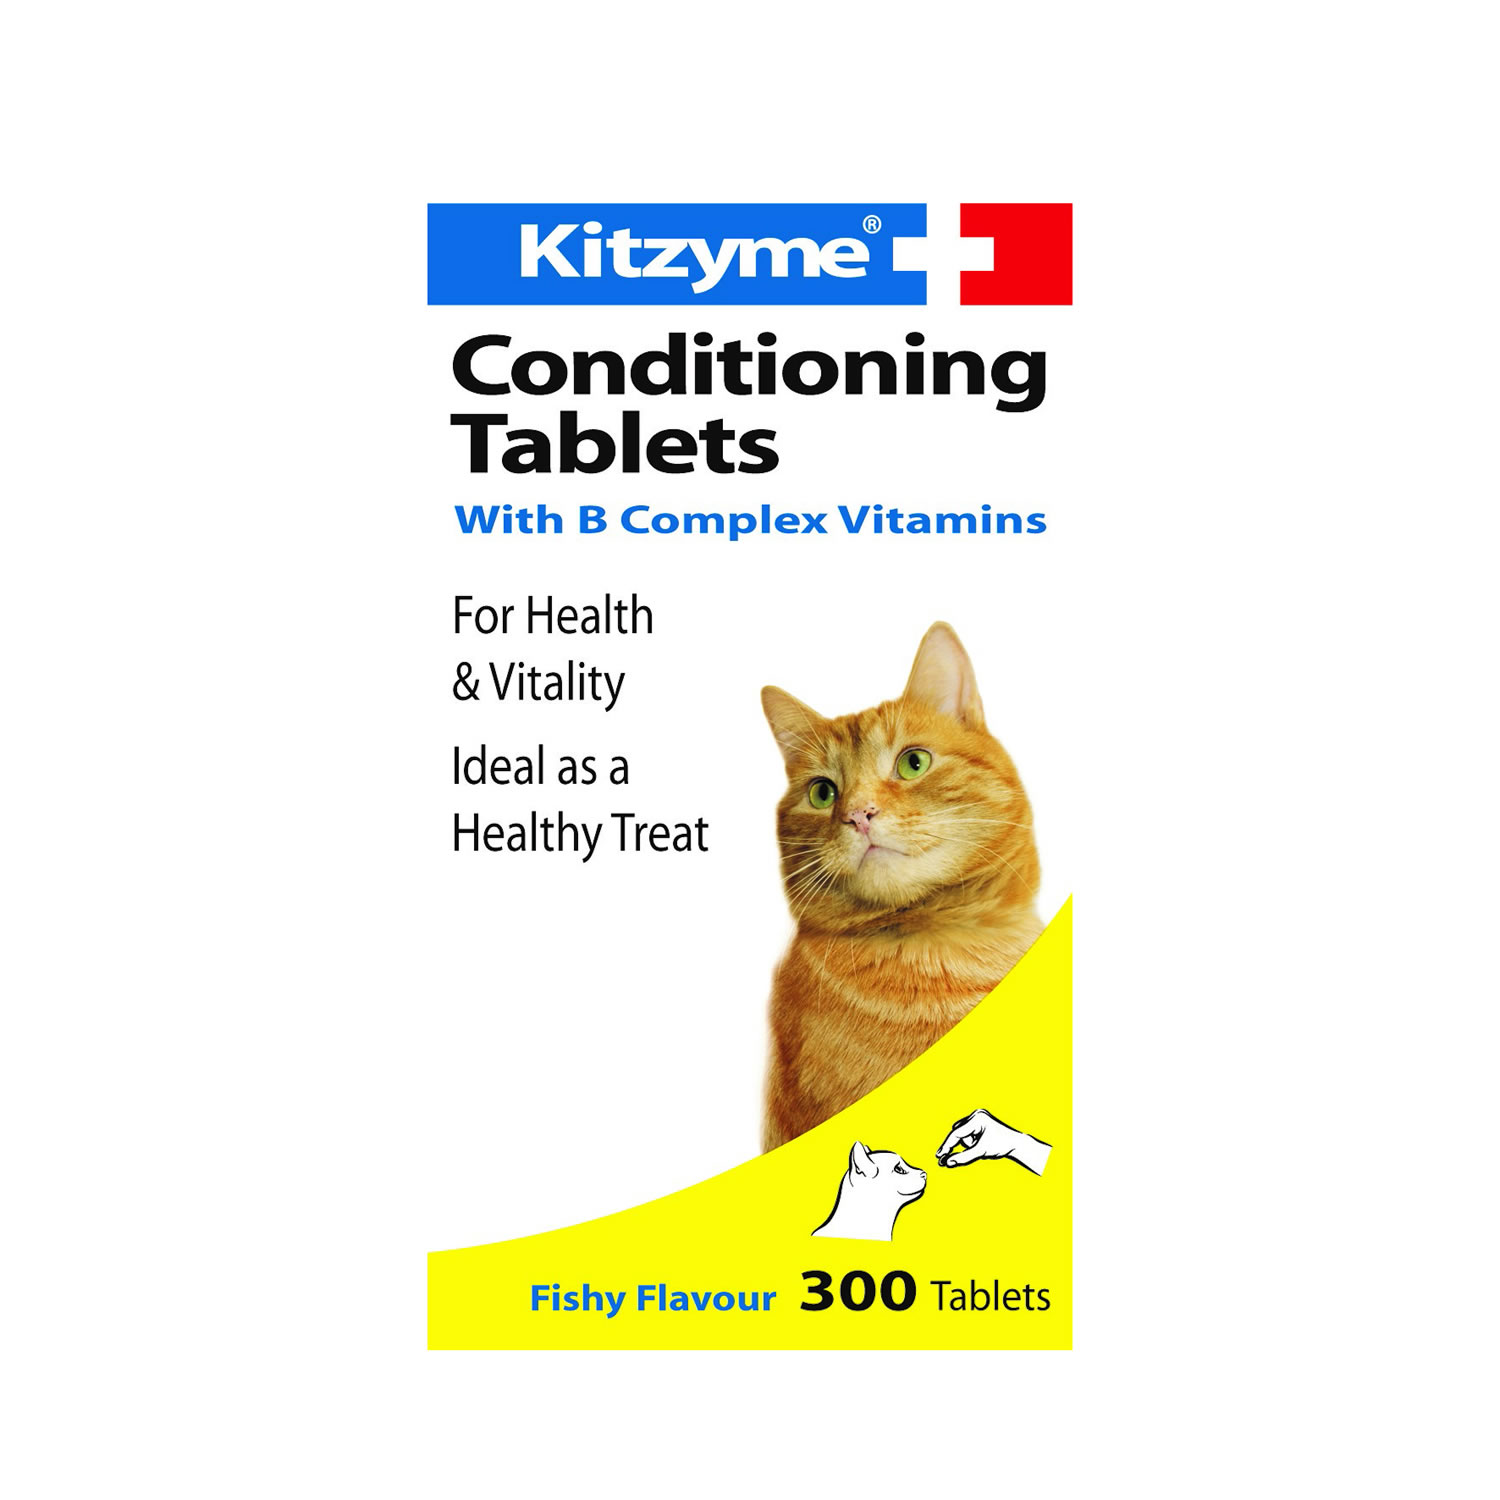 KITZYME CONDITIONING TABLETS KITZYME CONDITIONING TABLETS 300 PACK  300 PACK